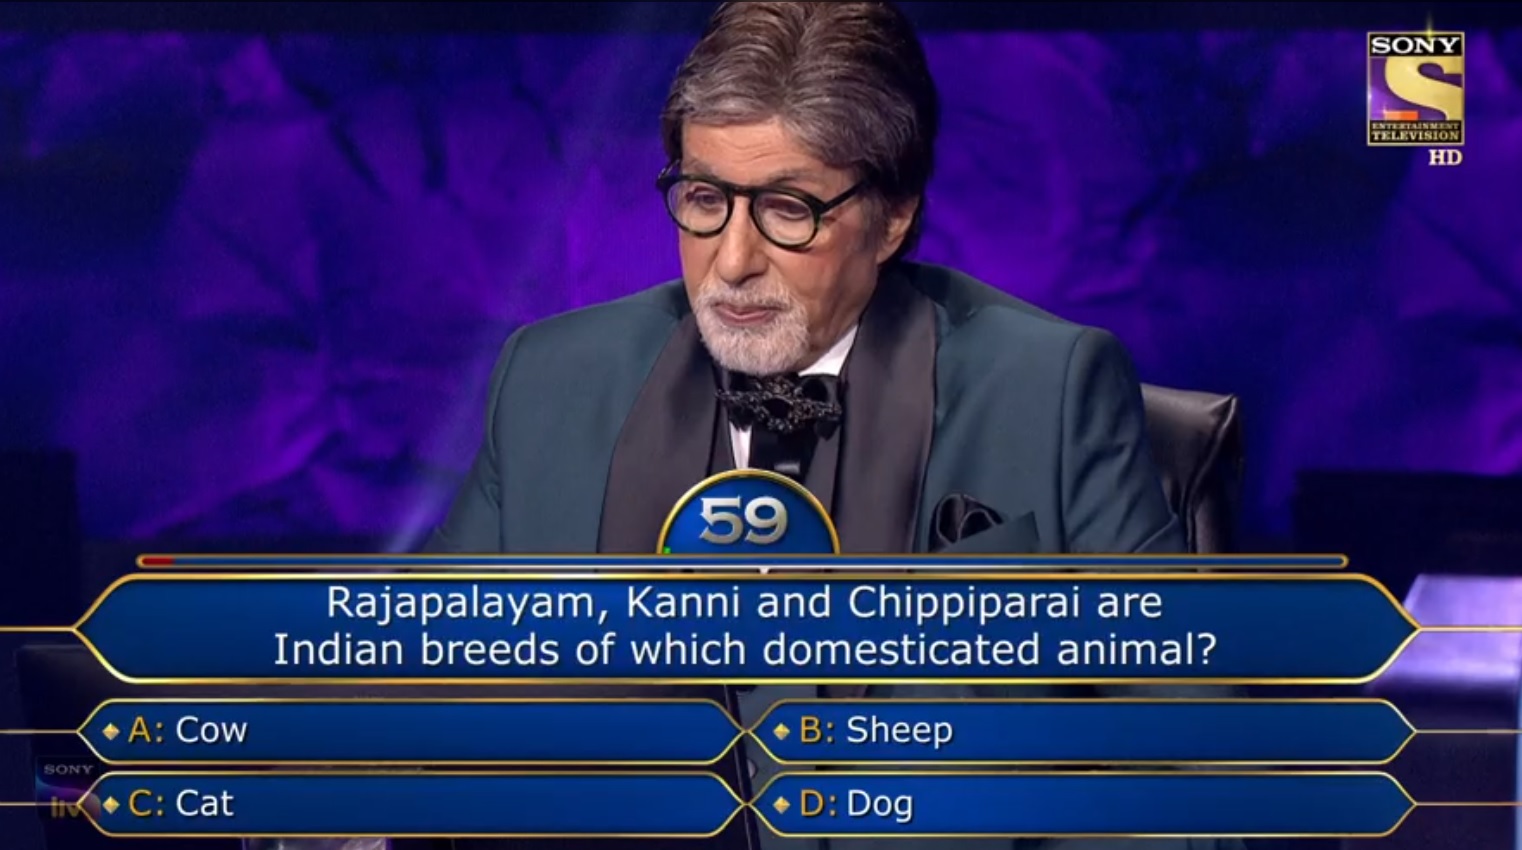 Ques : Rajapalayam, Kanni and Chippiparai are Indian breeds of which domesticated animal?